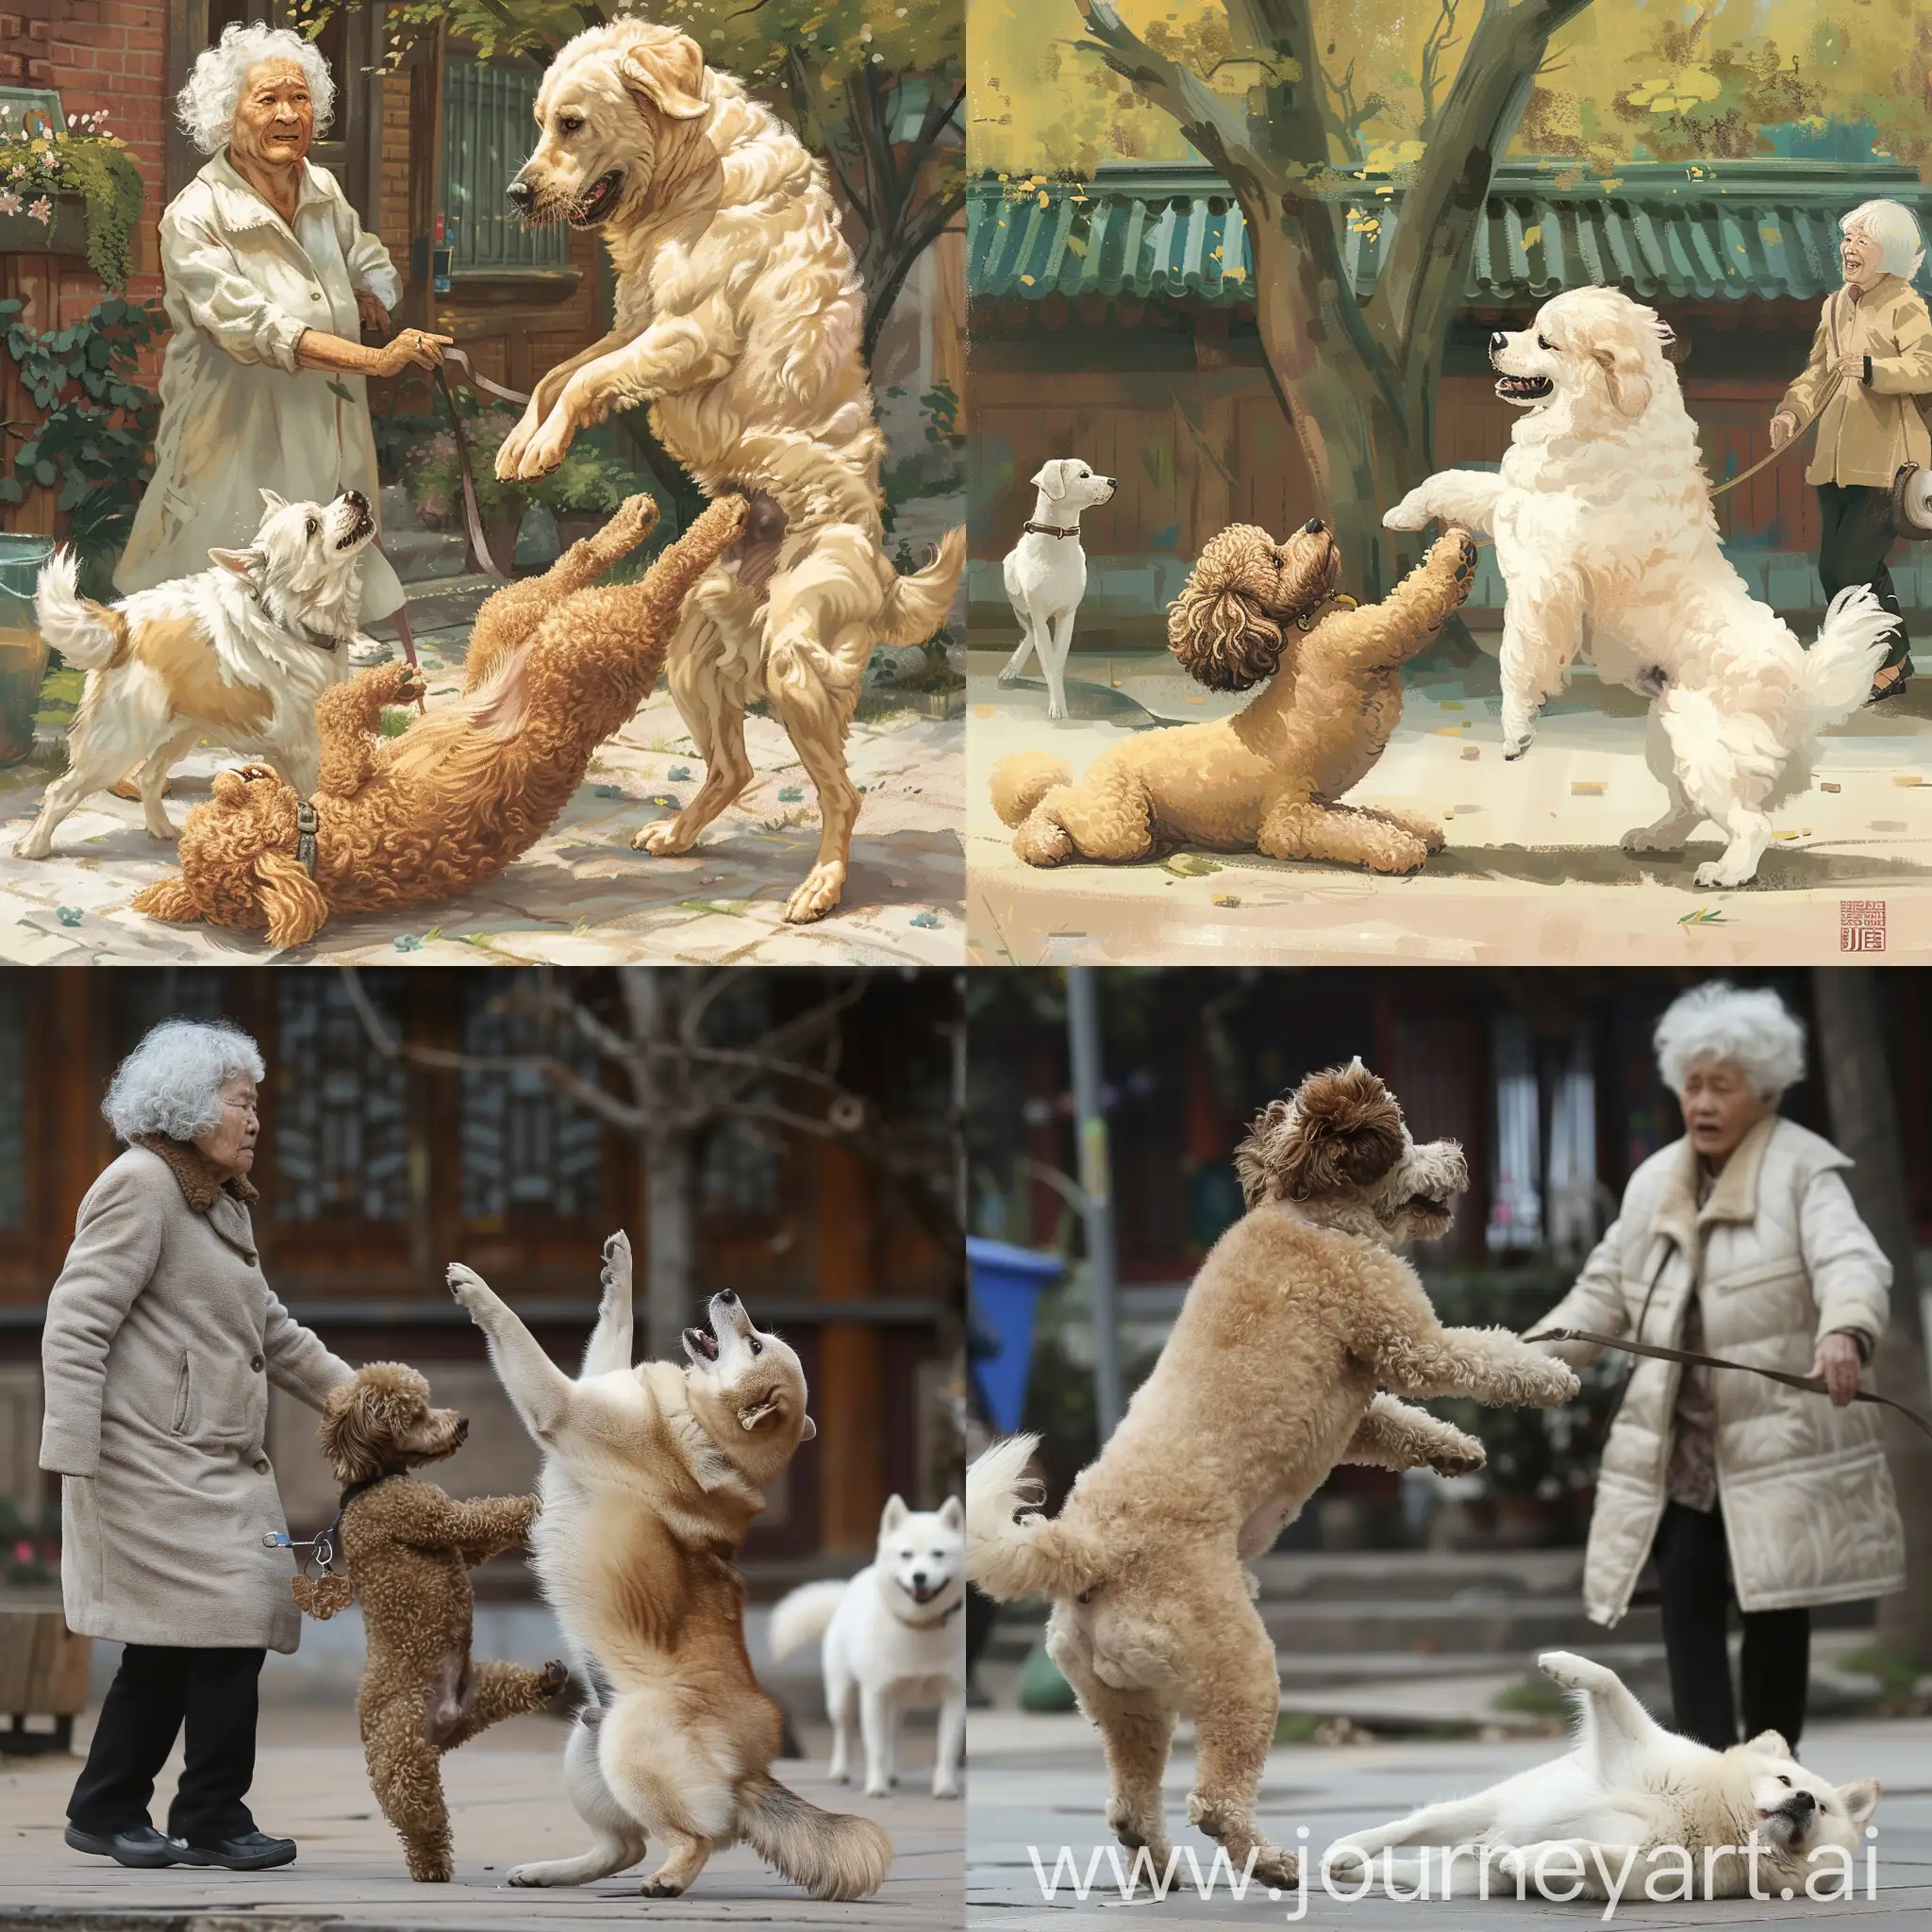 Elderly-Woman-Walking-Dogs-Encounter-with-Unleashed-Playful-Rural-Dog